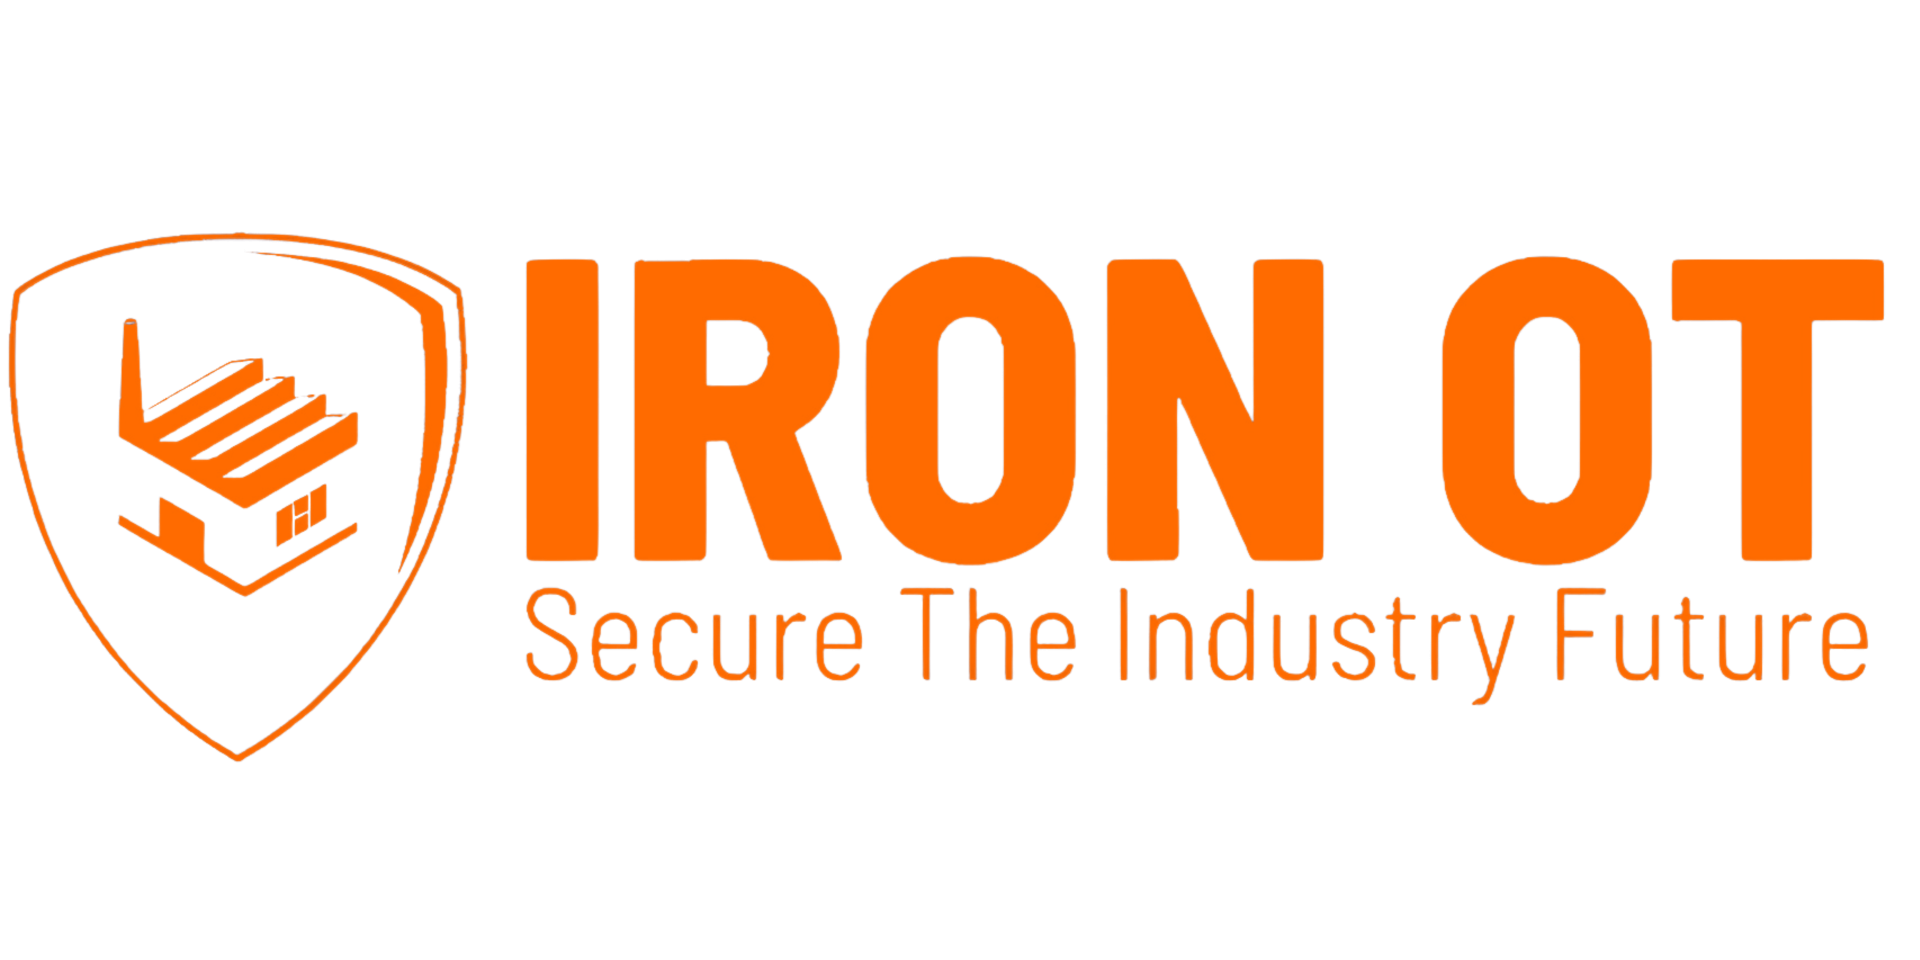 IronOT - SCADA Conference Partner